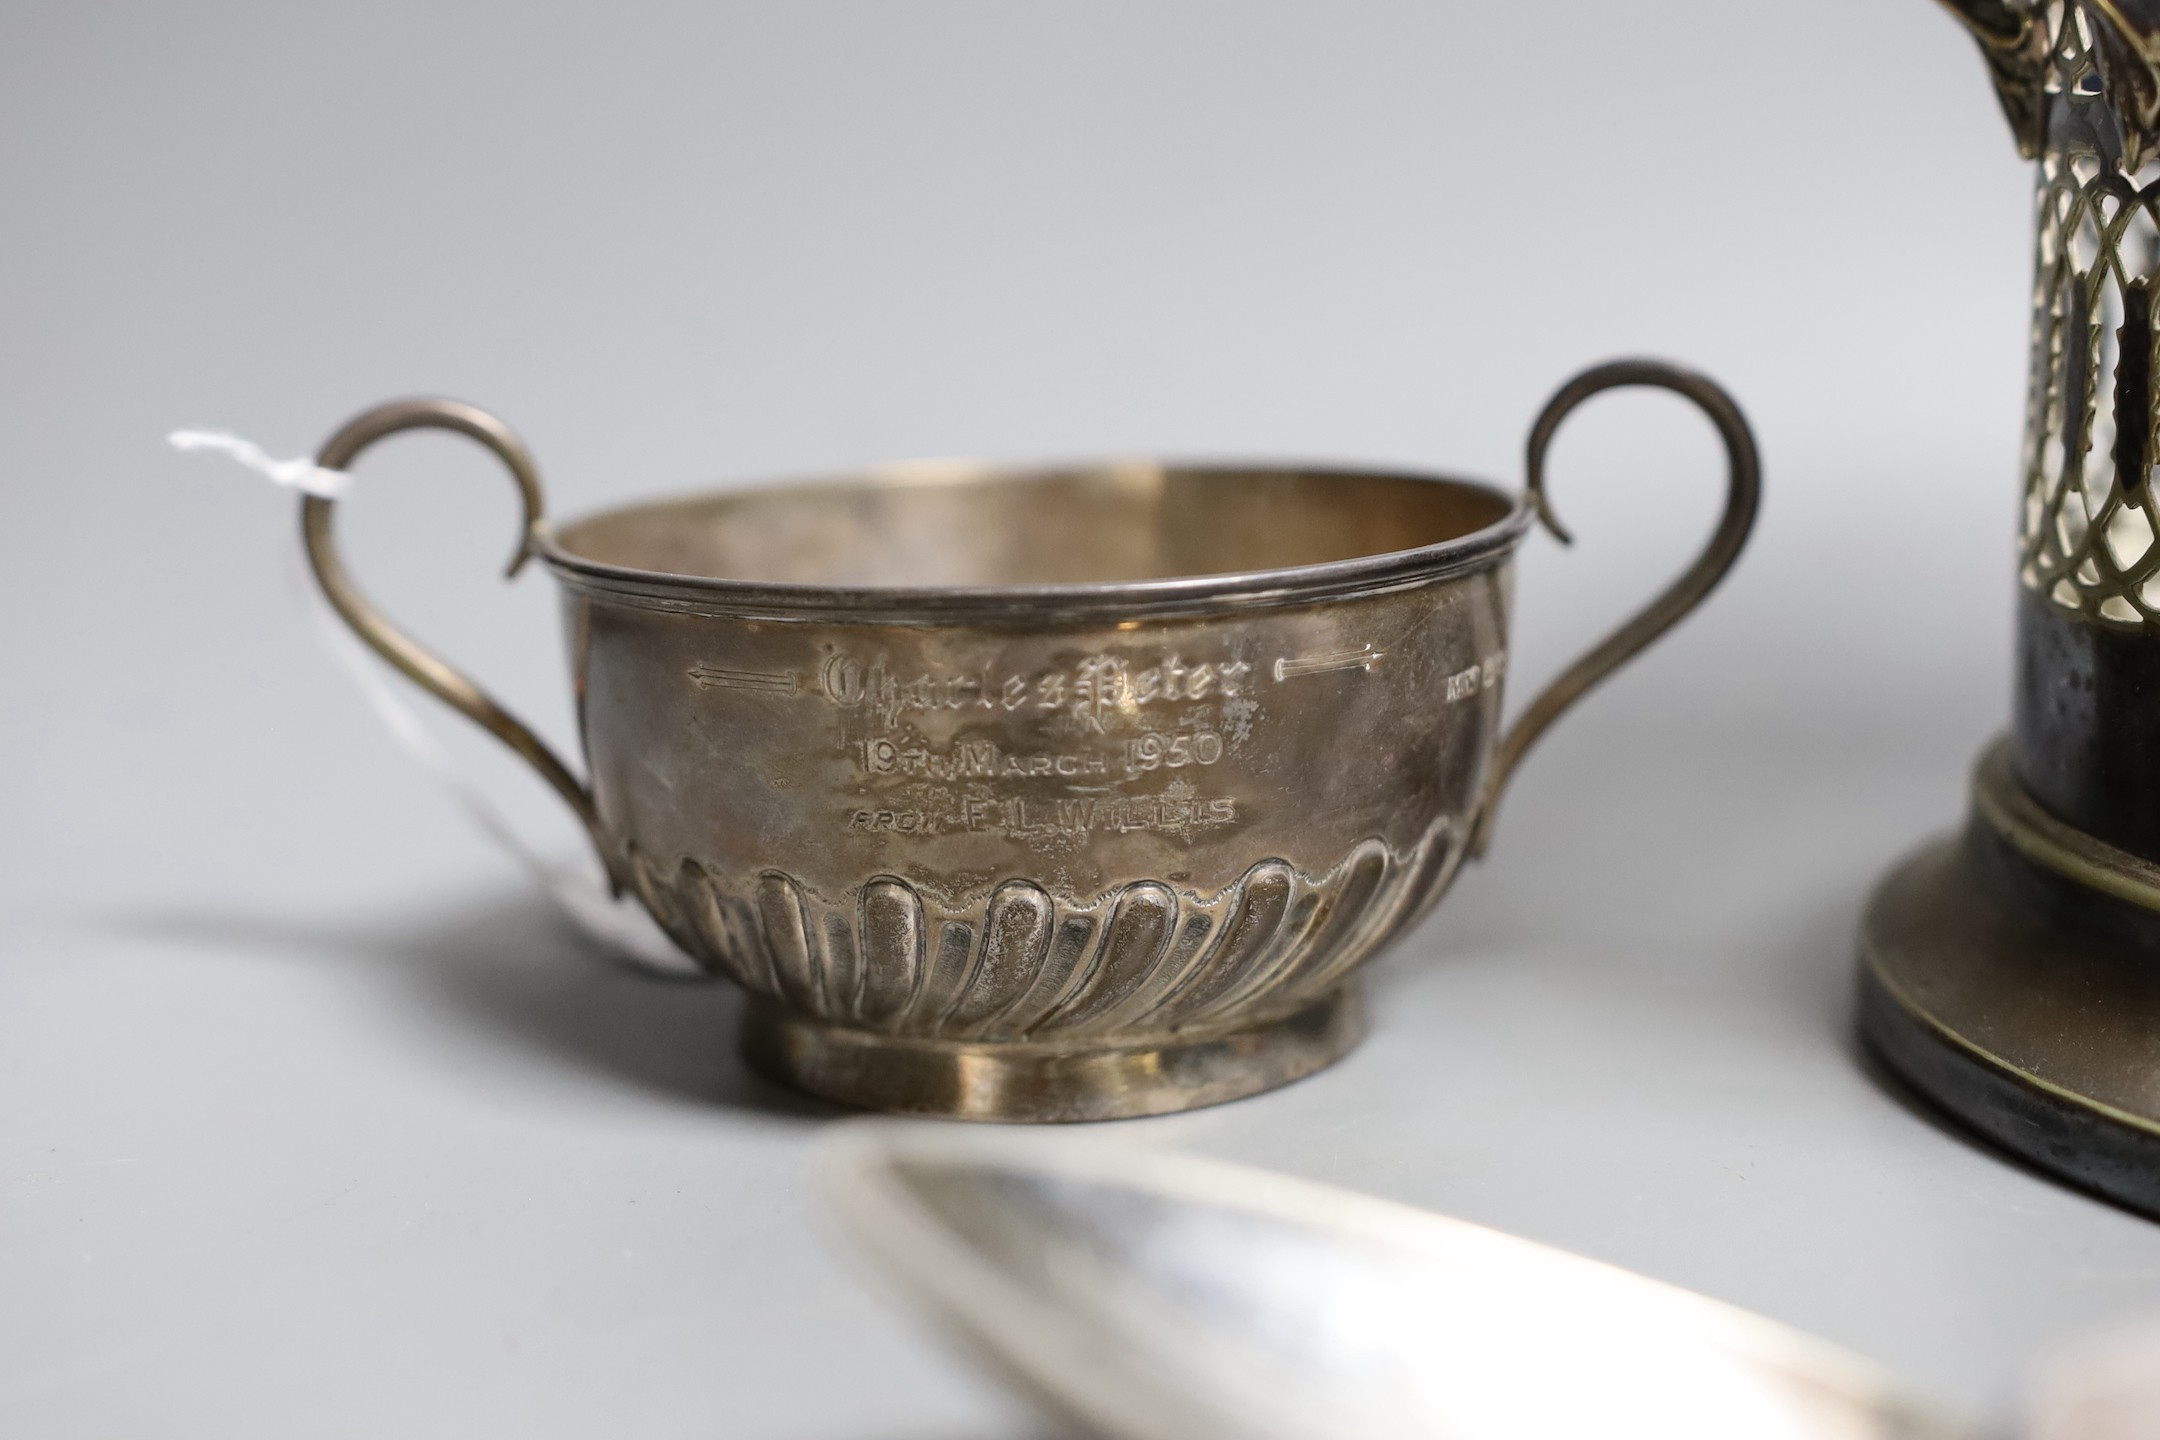 An Edwardian silver christening mug, with later engraved inscription, Birmingham, 1902, a silver two handed bowl, a plated syphon stand and a quantty of silver plated handled table knives etc.